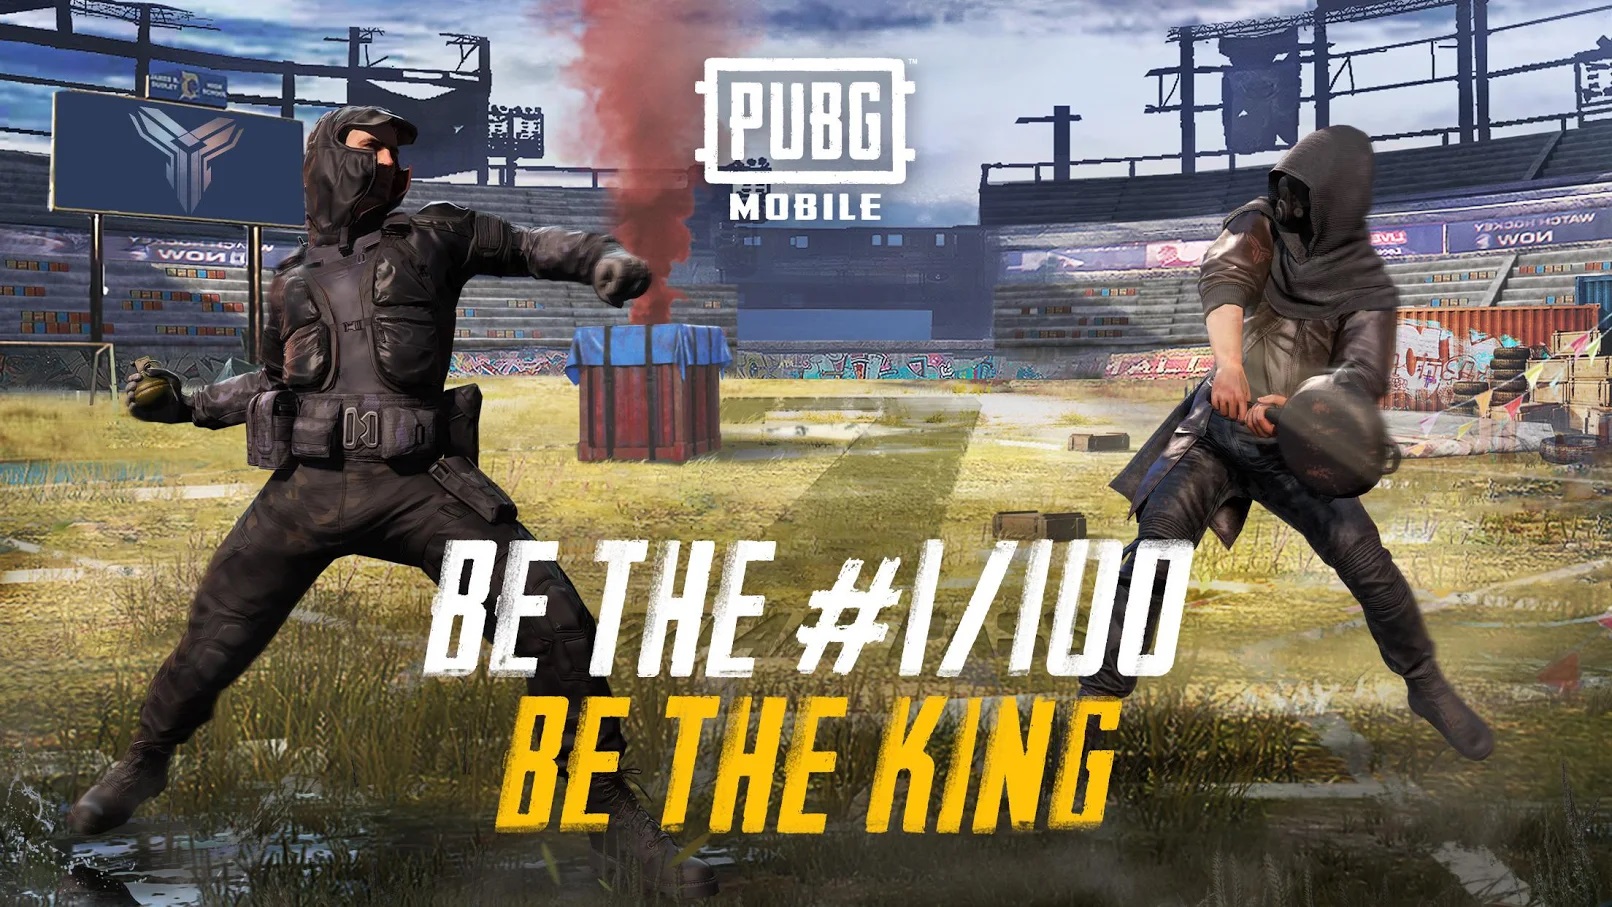 PUBG Mobile tops 100 million monthly active users VGC 